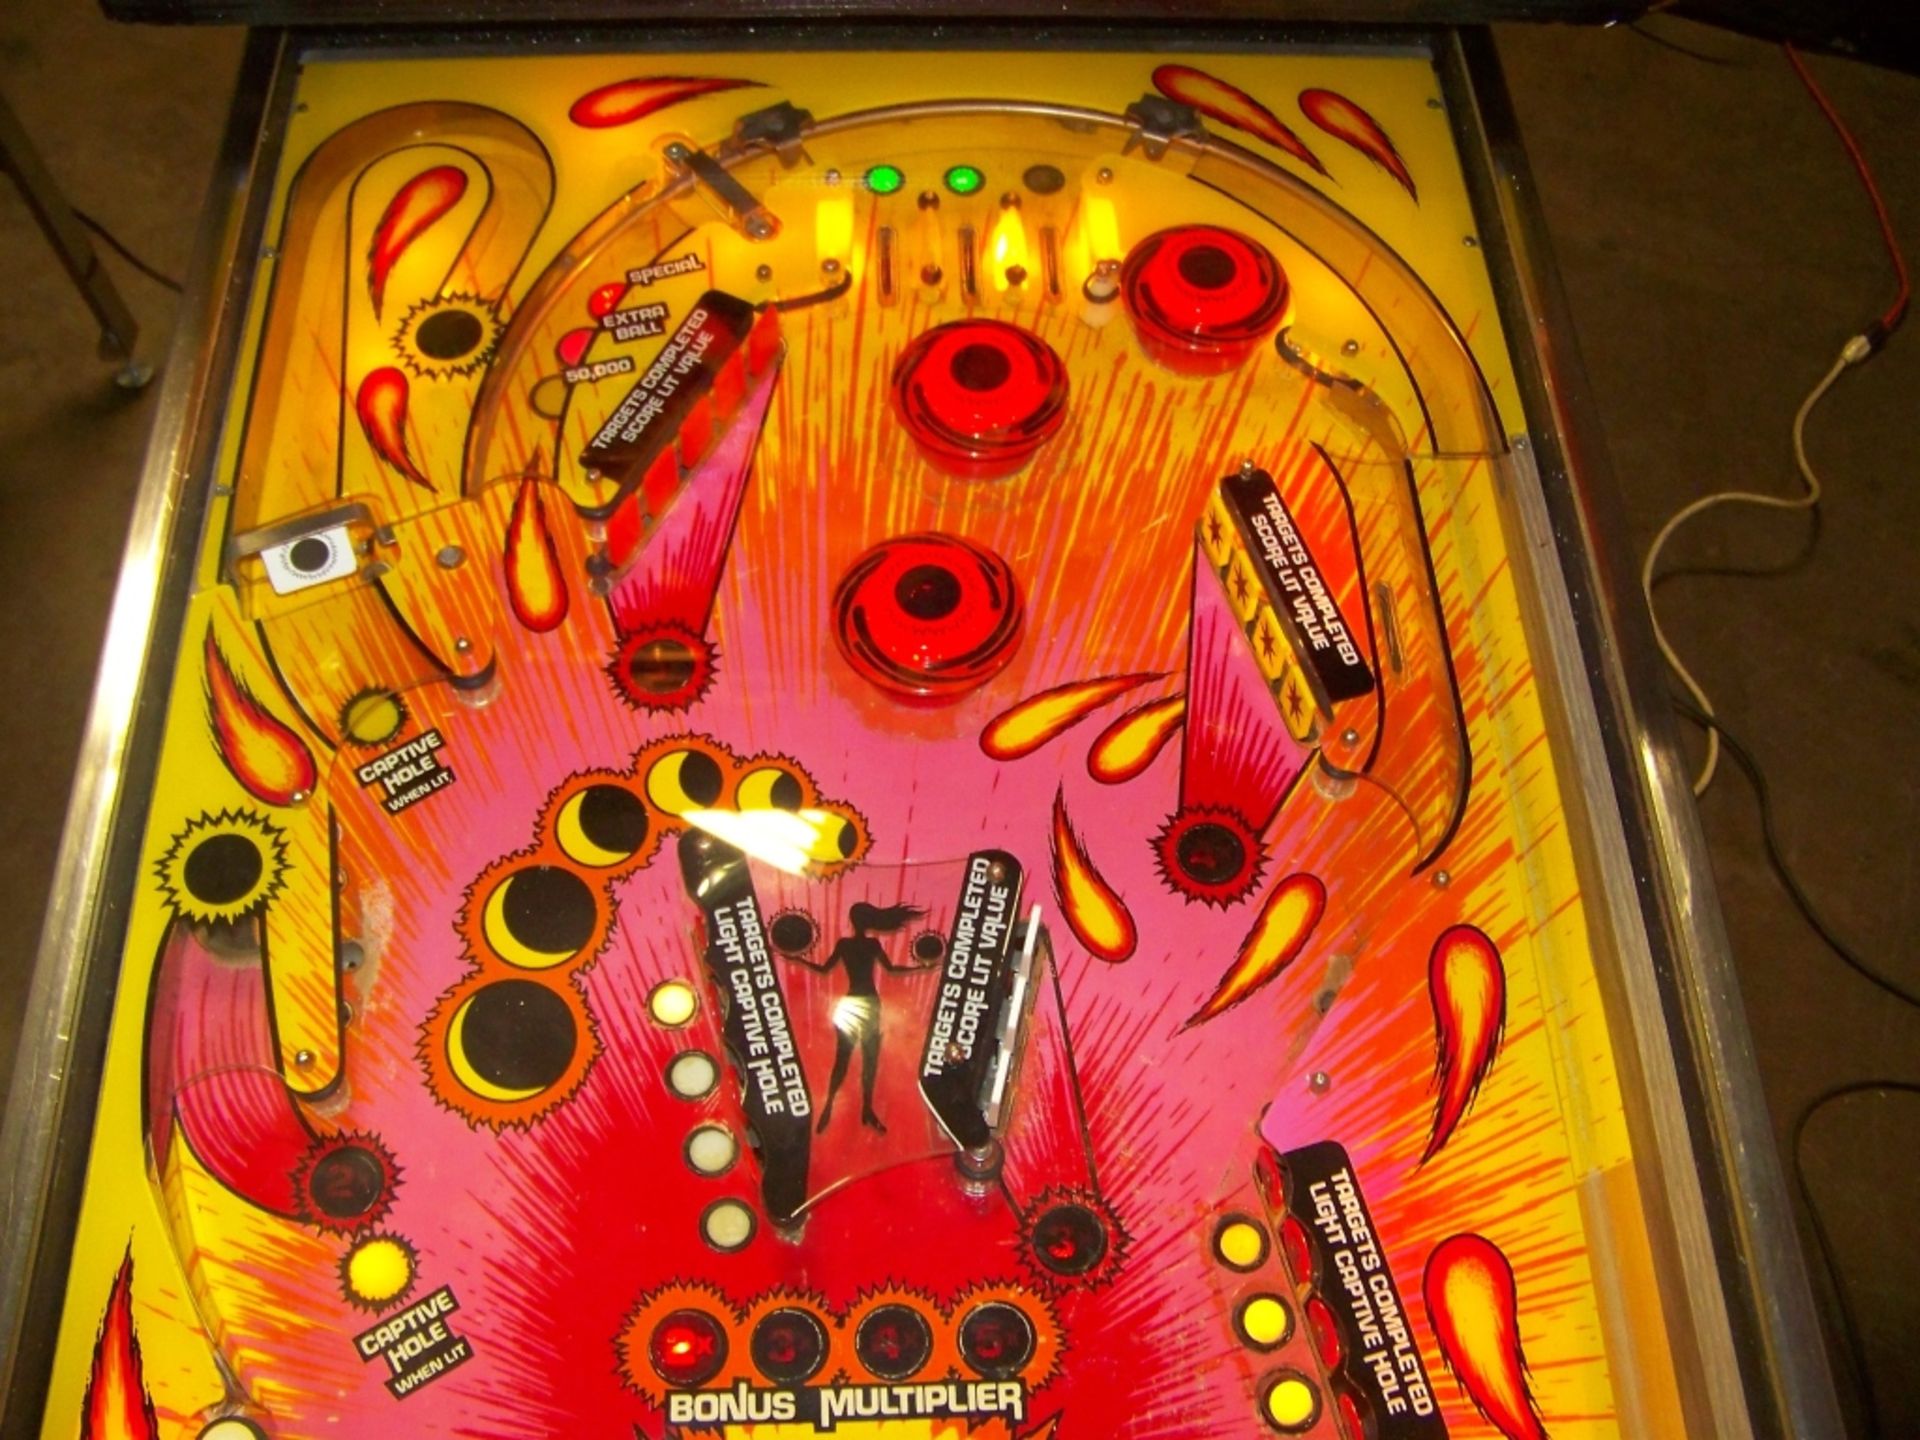 ECLIPSE PINBALL MACHINE RARE GOTTLIEB TITLE 1982 Item is in used condition. Evidence of wear and - Image 7 of 11